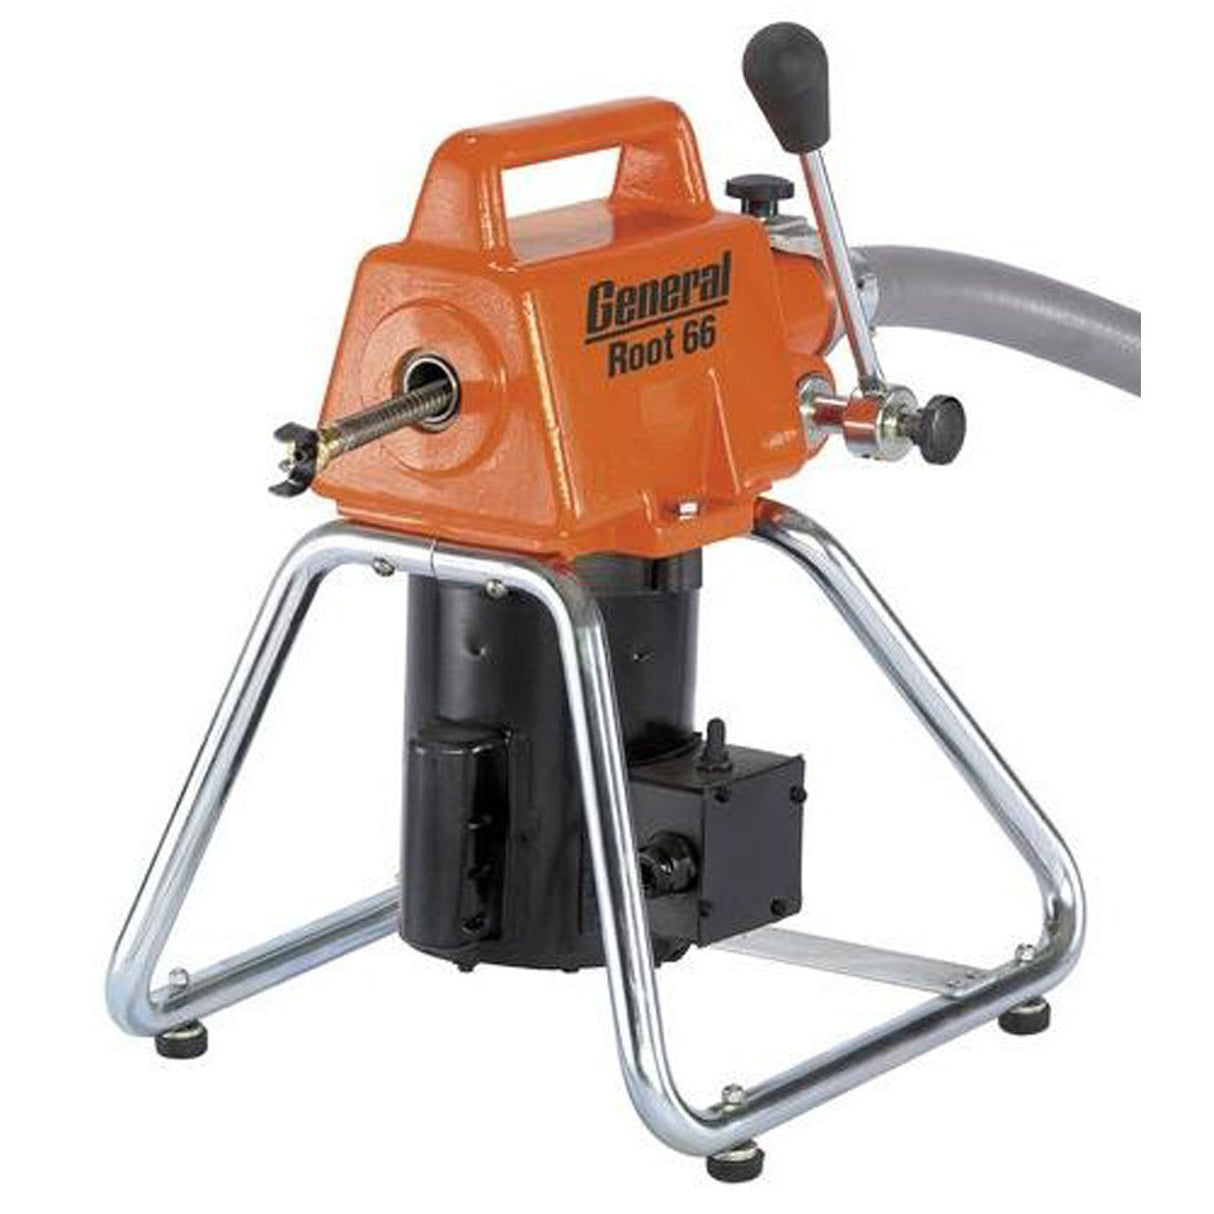 General Wire RT-66 Basic Root 66 w/ 1/2 hp Motor w/Rev. Switch, 10 ft. Power Cord w/GFI, Leather Gloves, (no cable)